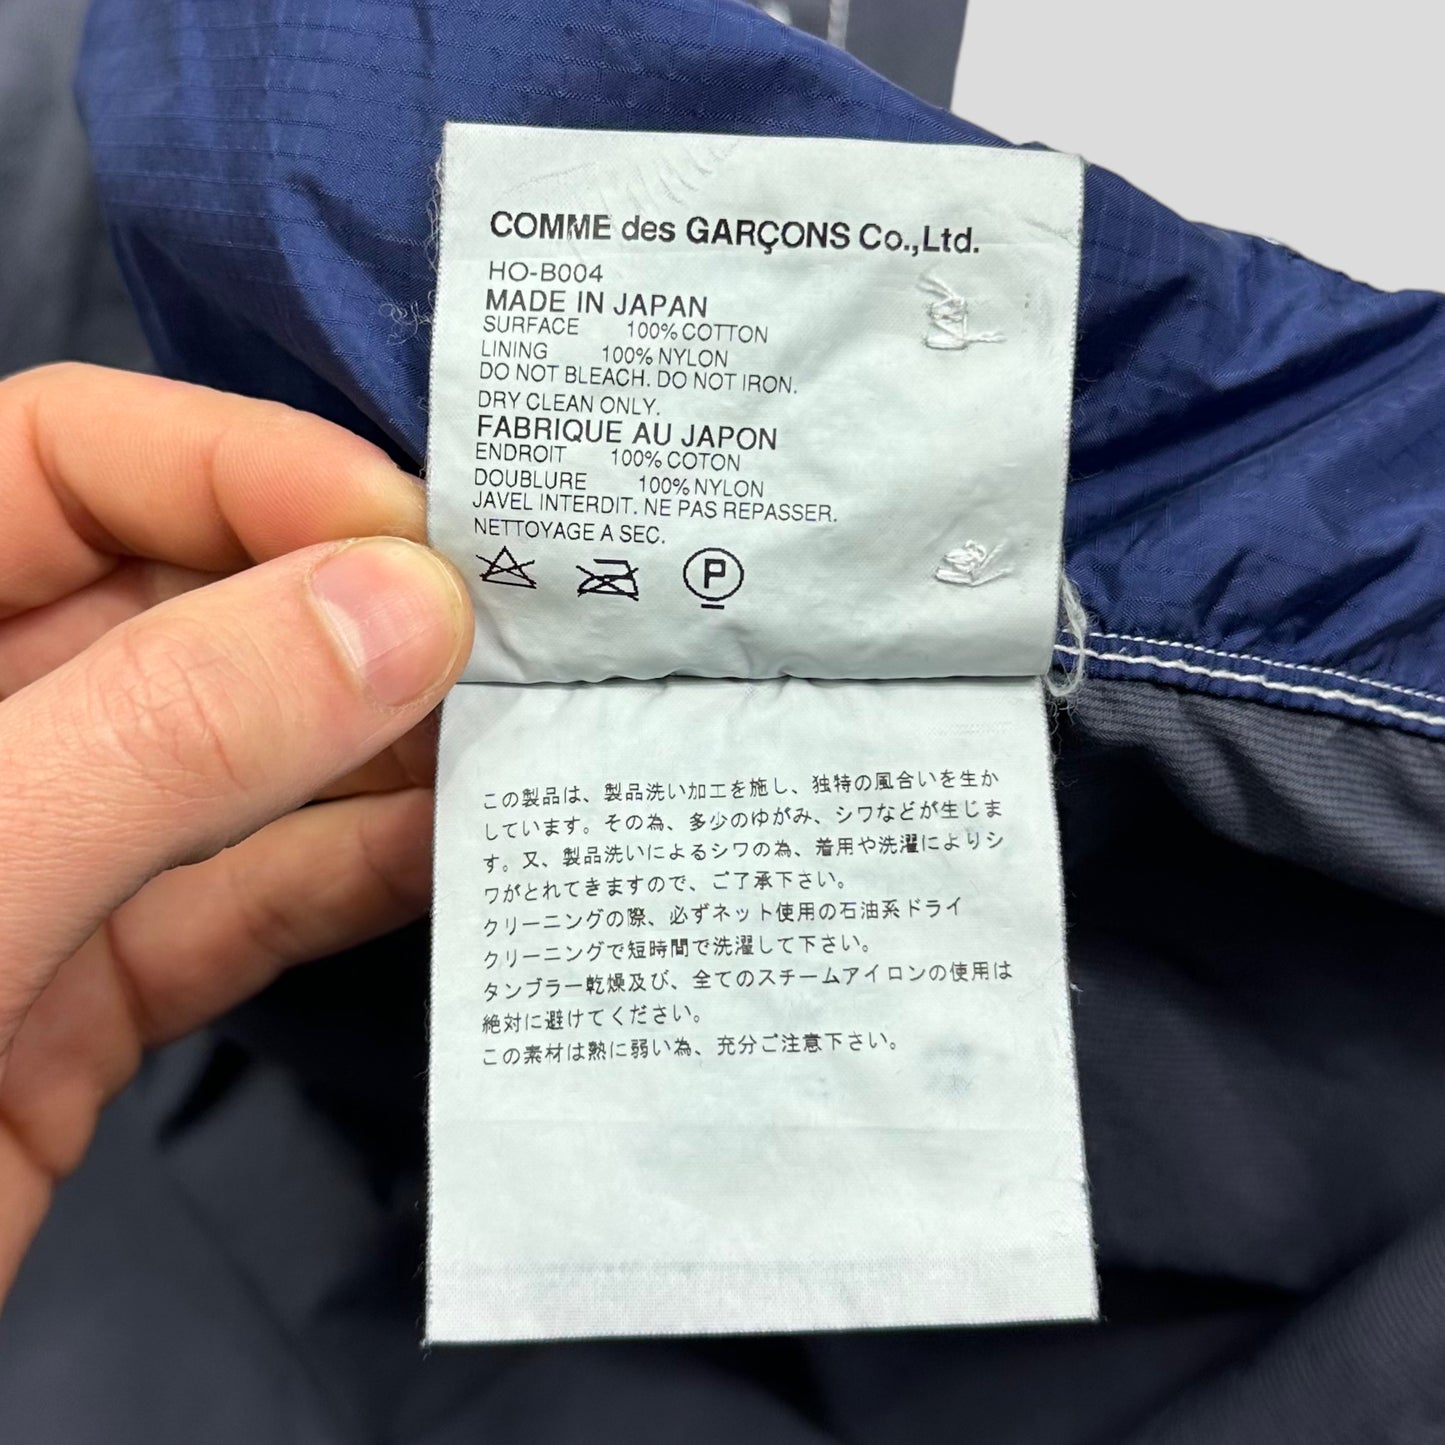 CDG Homme 2004 Windproof Cargo Shirt - M/L